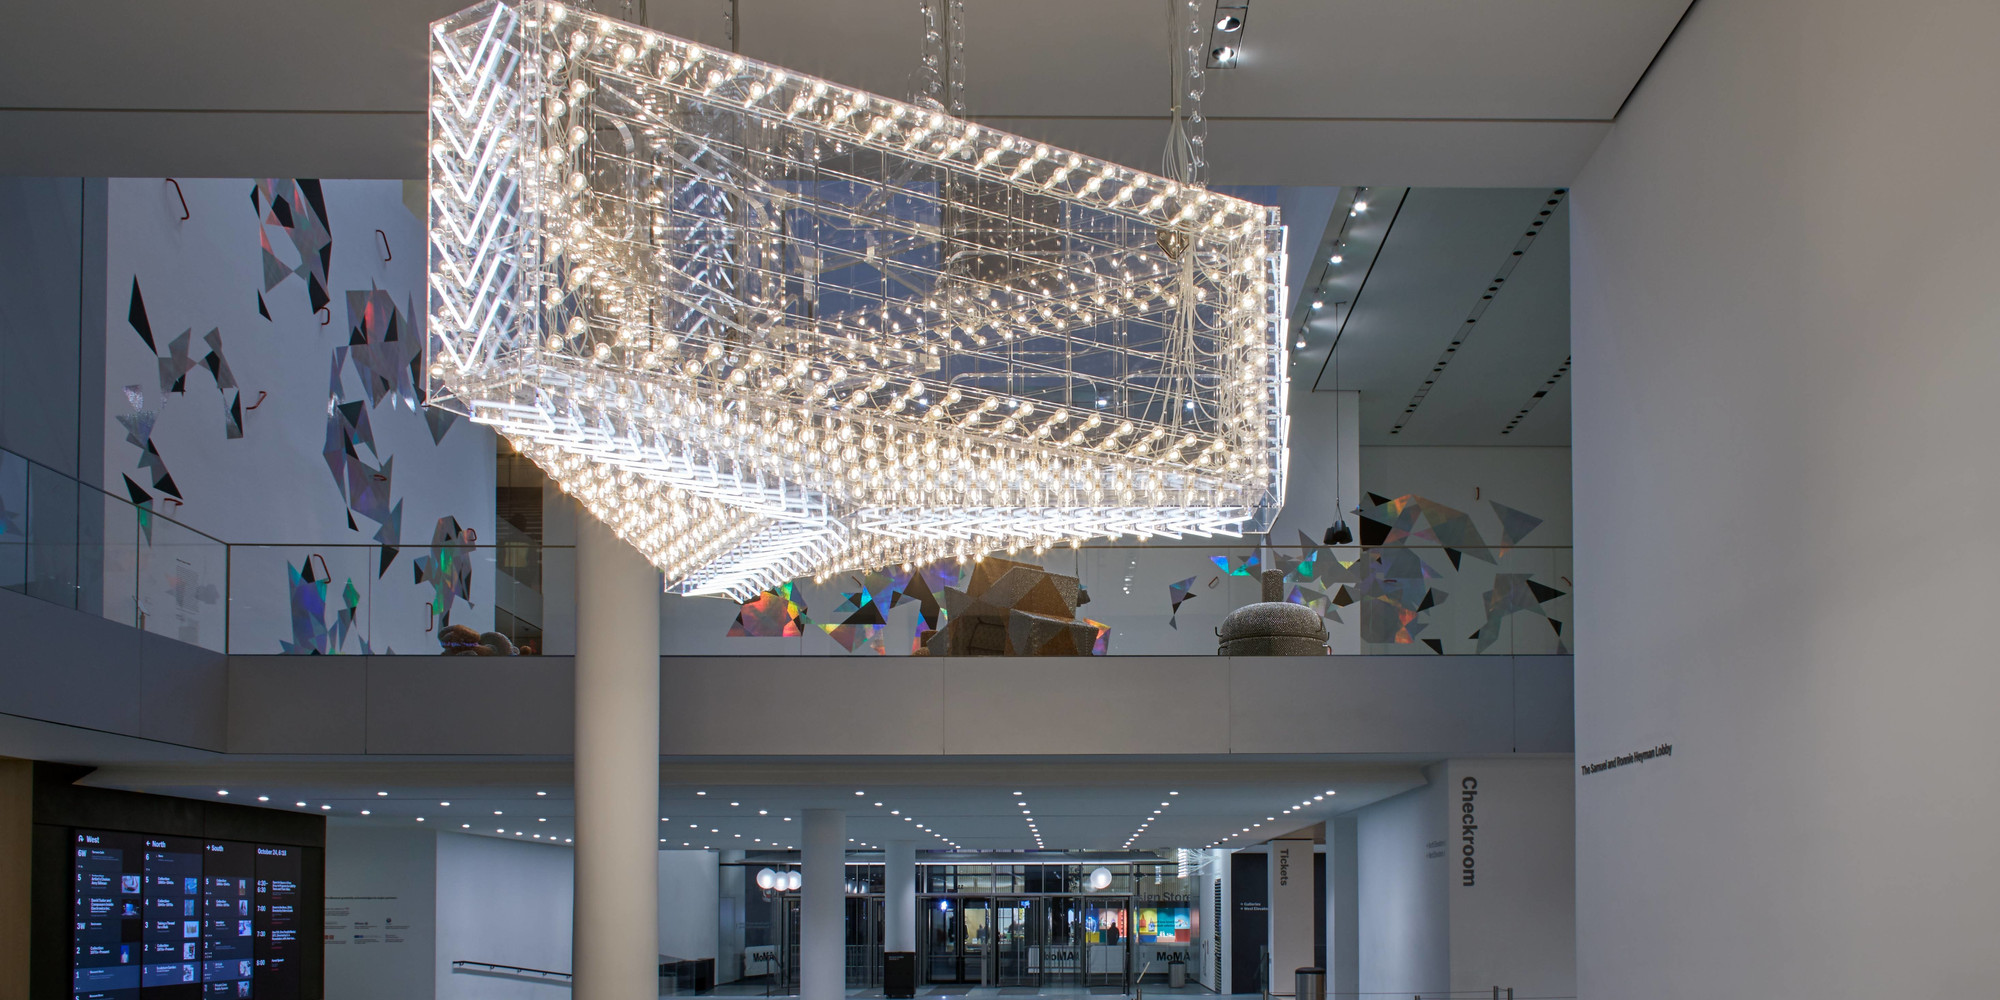 Installation view detail of Echo (2019) by Philippe Parreno, The Museum of Modern Art, New York. © 2019 The Museum of Modern Art. Photo: Denis Doorly